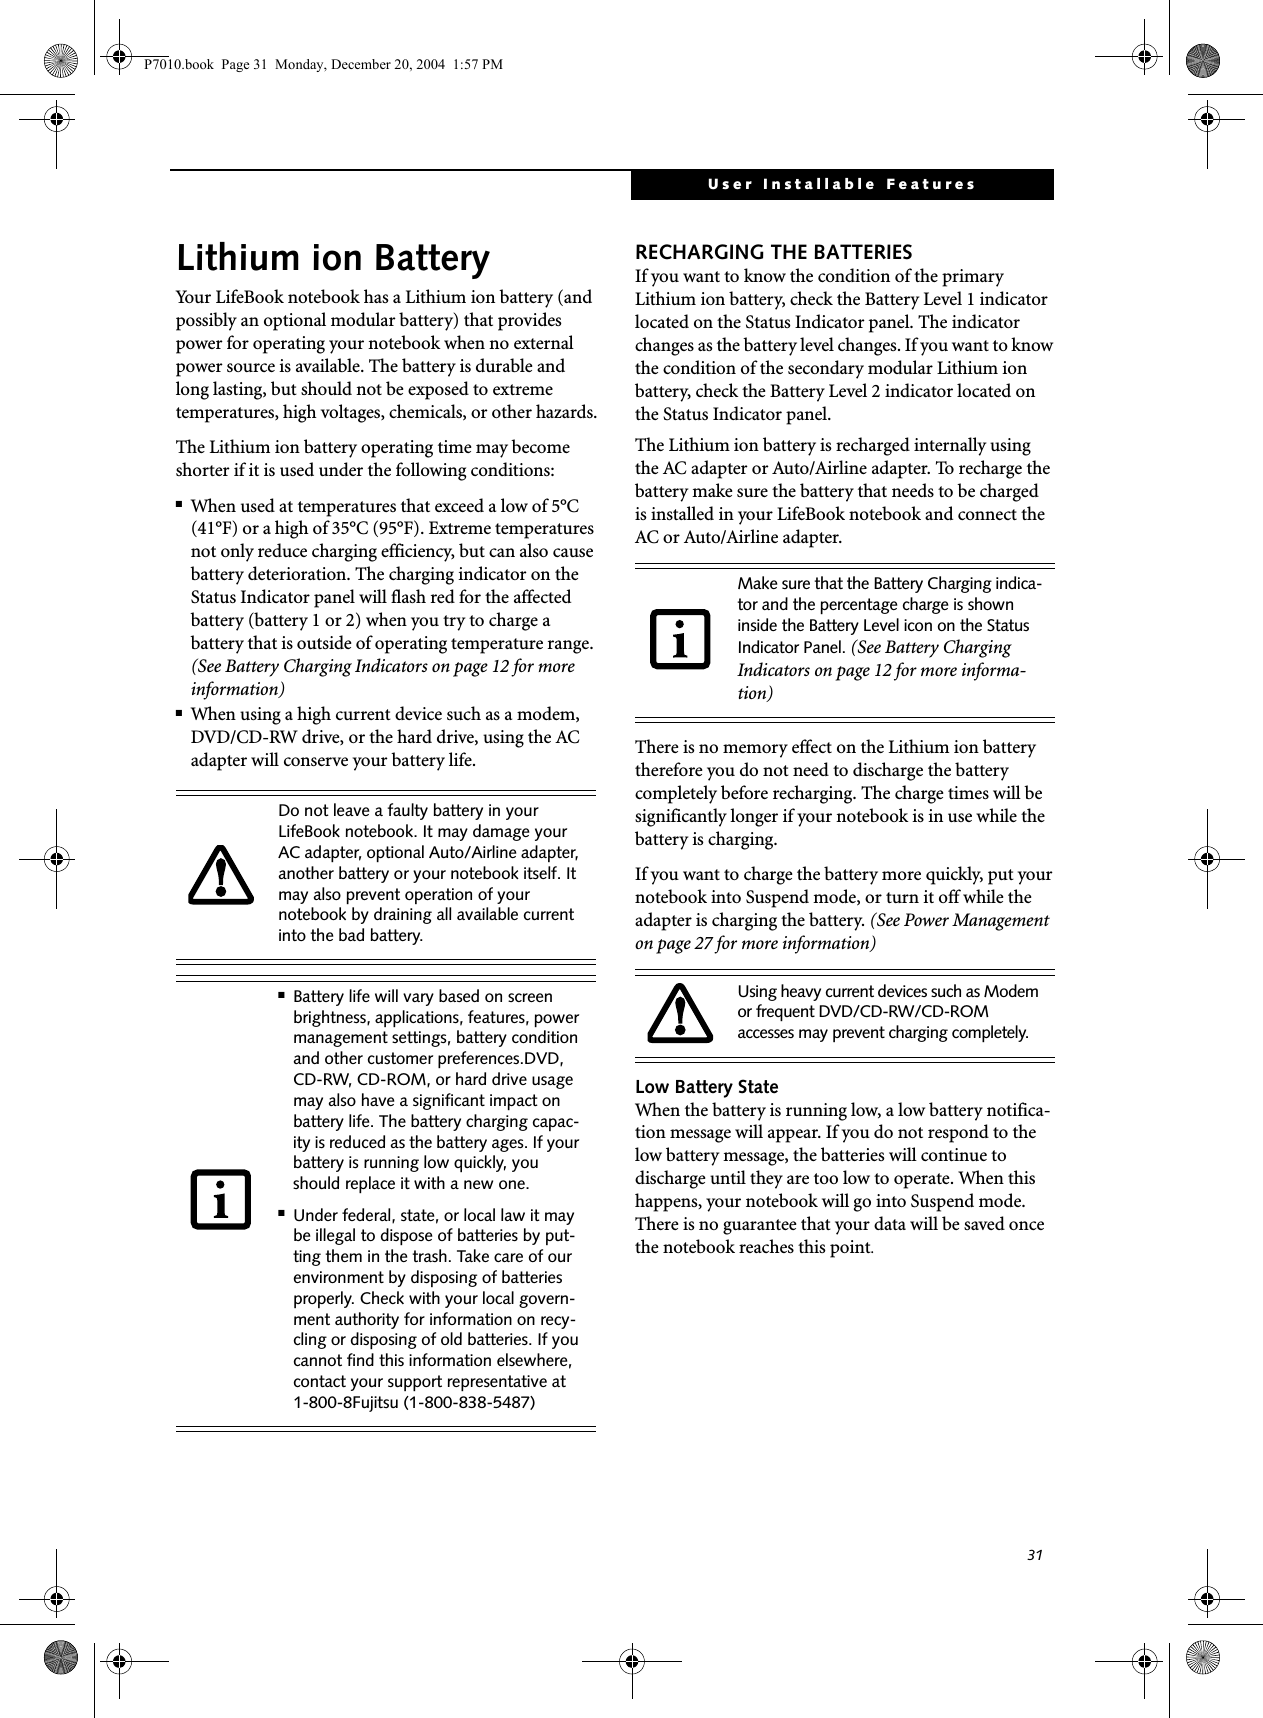 31User Installable FeaturesLithium ion BatteryYour LifeBook notebook has a Lithium ion battery (and possibly an optional modular battery) that provides power for operating your notebook when no external power source is available. The battery is durable and long lasting, but should not be exposed to extreme temperatures, high voltages, chemicals, or other hazards.The Lithium ion battery operating time may become shorter if it is used under the following conditions:■When used at temperatures that exceed a low of 5°C (41°F) or a high of 35°C (95°F). Extreme temperatures not only reduce charging efficiency, but can also cause battery deterioration. The charging indicator on the Status Indicator panel will flash red for the affected battery (battery 1 or 2) when you try to charge a battery that is outside of operating temperature range. (See Battery Charging Indicators on page 12 for more information)■When using a high current device such as a modem, DVD/CD-RW drive, or the hard drive, using the AC adapter will conserve your battery life.RECHARGING THE BATTERIESIf you want to know the condition of the primary Lithium ion battery, check the Battery Level 1 indicator located on the Status Indicator panel. The indicator changes as the battery level changes. If you want to know the condition of the secondary modular Lithium ion battery, check the Battery Level 2 indicator located on the Status Indicator panel. The Lithium ion battery is recharged internally using the AC adapter or Auto/Airline adapter. To recharge the battery make sure the battery that needs to be charged is installed in your LifeBook notebook and connect the AC or Auto/Airline adapter.There is no memory effect on the Lithium ion battery therefore you do not need to discharge the battery completely before recharging. The charge times will be significantly longer if your notebook is in use while the battery is charging. If you want to charge the battery more quickly, put your notebook into Suspend mode, or turn it off while the adapter is charging the battery. (See Power Management on page 27 for more information) Low Battery StateWhen the battery is running low, a low battery notifica-tion message will appear. If you do not respond to the low battery message, the batteries will continue to discharge until they are too low to operate. When this happens, your notebook will go into Suspend mode. There is no guarantee that your data will be saved once the notebook reaches this point.Do not leave a faulty battery in your LifeBook notebook. It may damage your AC adapter, optional Auto/Airline adapter, another battery or your notebook itself. It may also prevent operation of your notebook by draining all available current into the bad battery.■Battery life will vary based on screen brightness, applications, features, power management settings, battery condition and other customer preferences.DVD, CD-RW, CD-ROM, or hard drive usage may also have a significant impact on battery life. The battery charging capac-ity is reduced as the battery ages. If your battery is running low quickly, you should replace it with a new one.■Under federal, state, or local law it may be illegal to dispose of batteries by put-ting them in the trash. Take care of our environment by disposing of batteries properly. Check with your local govern-ment authority for information on recy-cling or disposing of old batteries. If you cannot find this information elsewhere, contact your support representative at 1-800-8Fujitsu (1-800-838-5487)Make sure that the Battery Charging indica-tor and the percentage charge is shown inside the Battery Level icon on the Status Indicator Panel. (See Battery Charging Indicators on page 12 for more informa-tion)Using heavy current devices such as Modem or frequent DVD/CD-RW/CD-ROM accesses may prevent charging completely.P7010.book  Page 31  Monday, December 20, 2004  1:57 PM